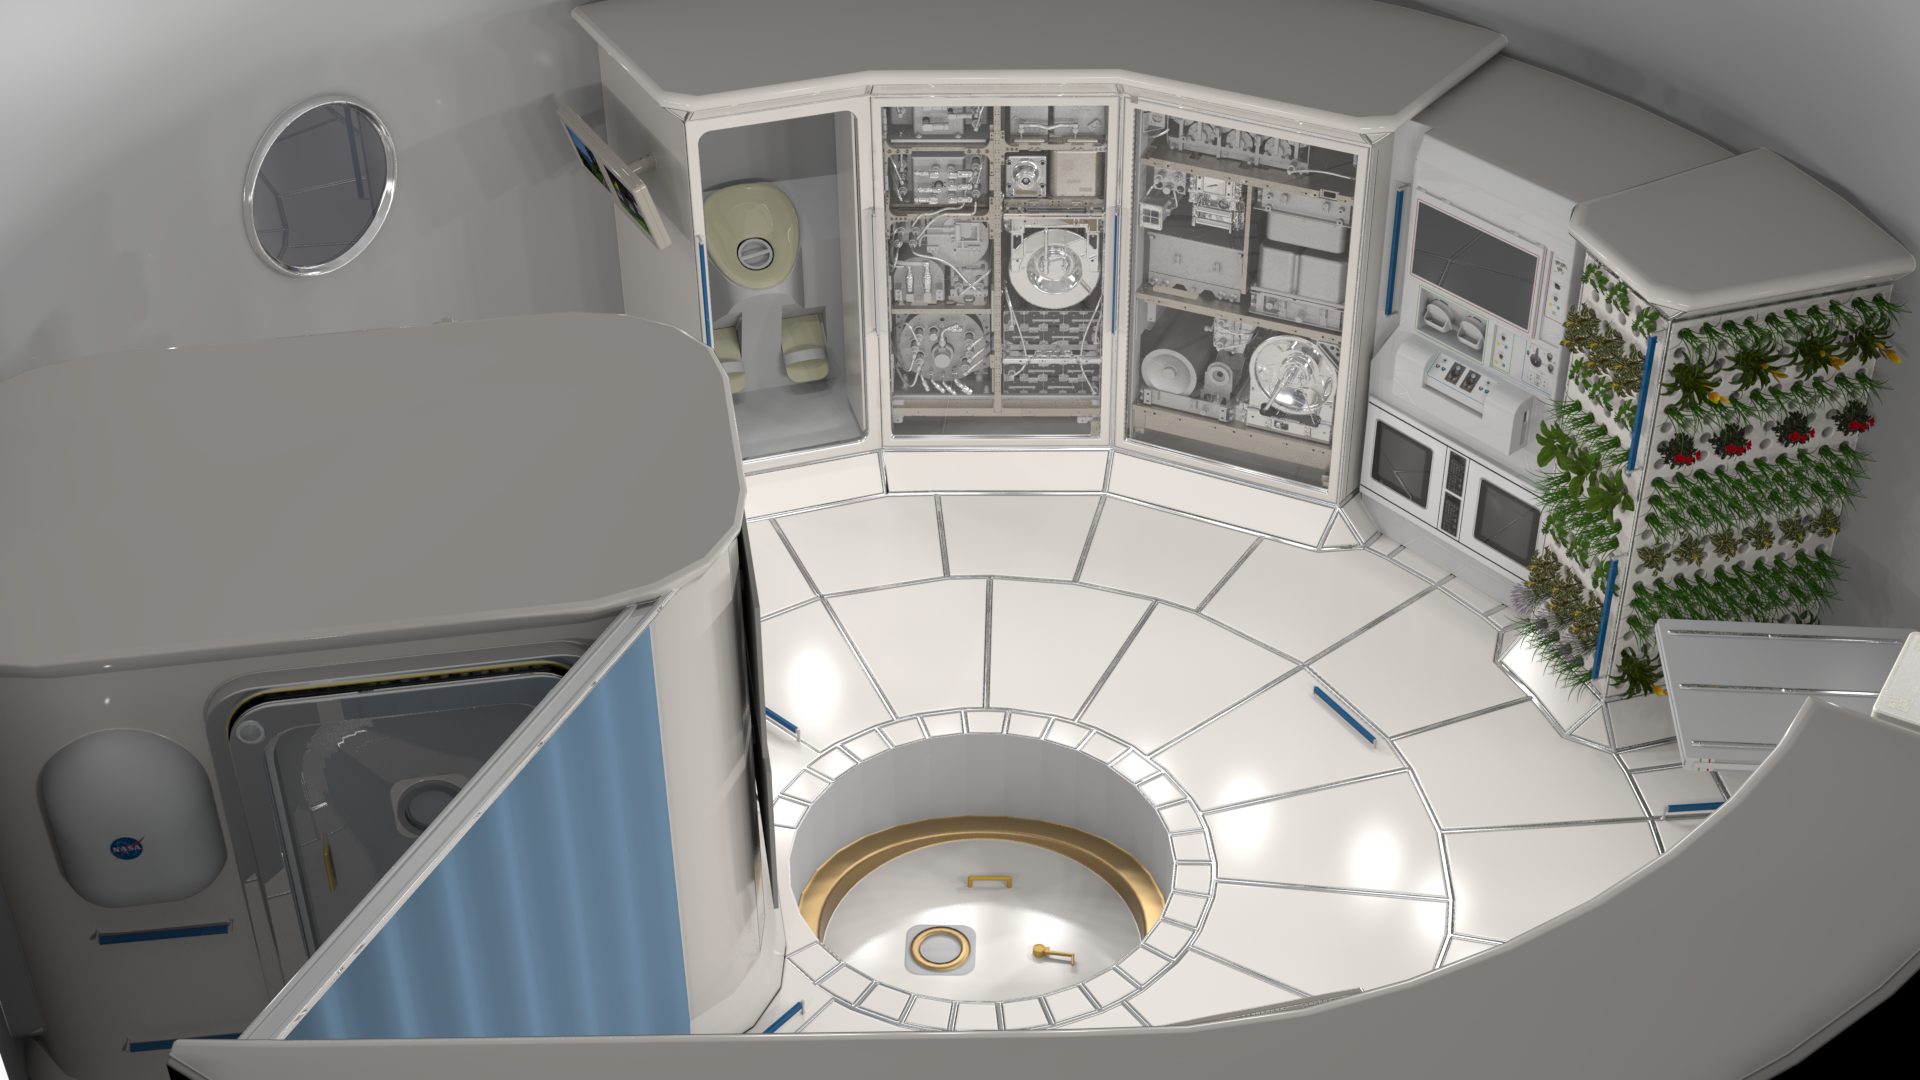 Illustration of the interior of a deep space habitat